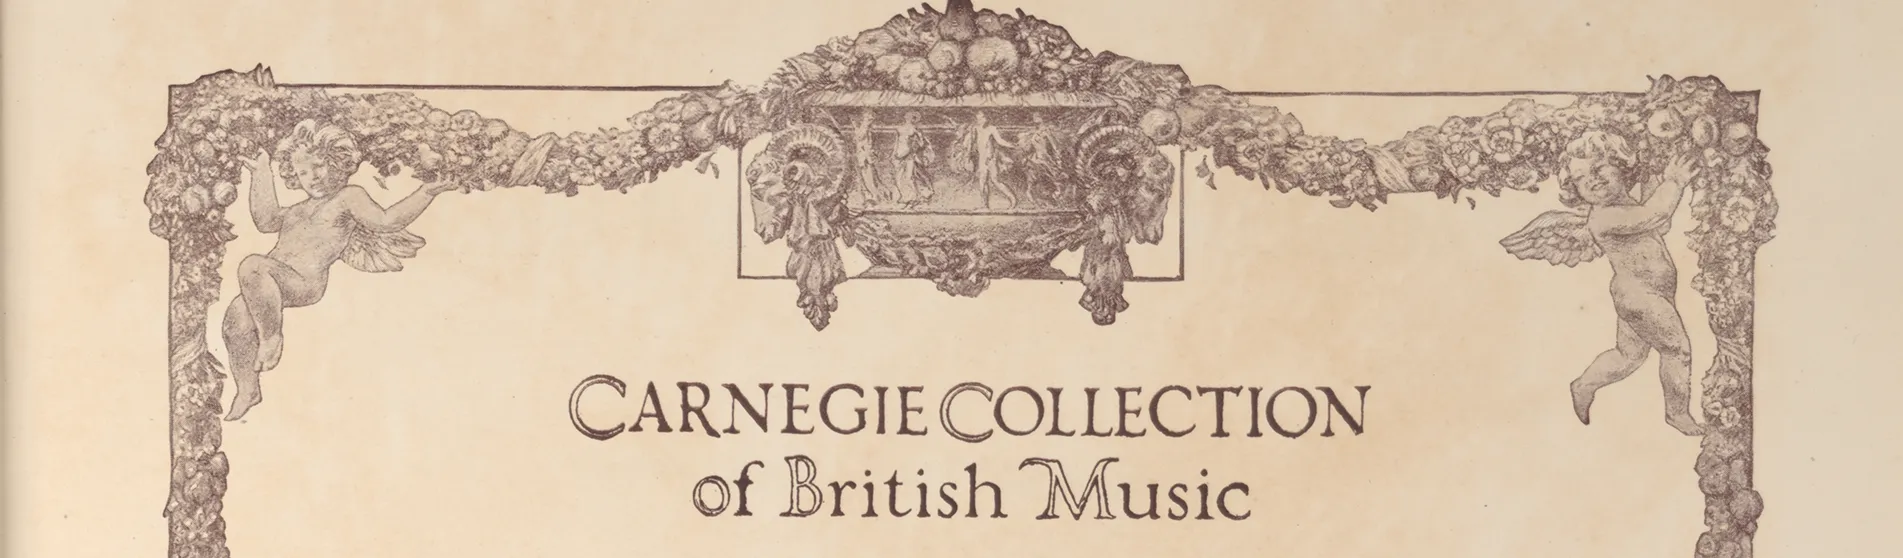 Title page of a collection of musical scores